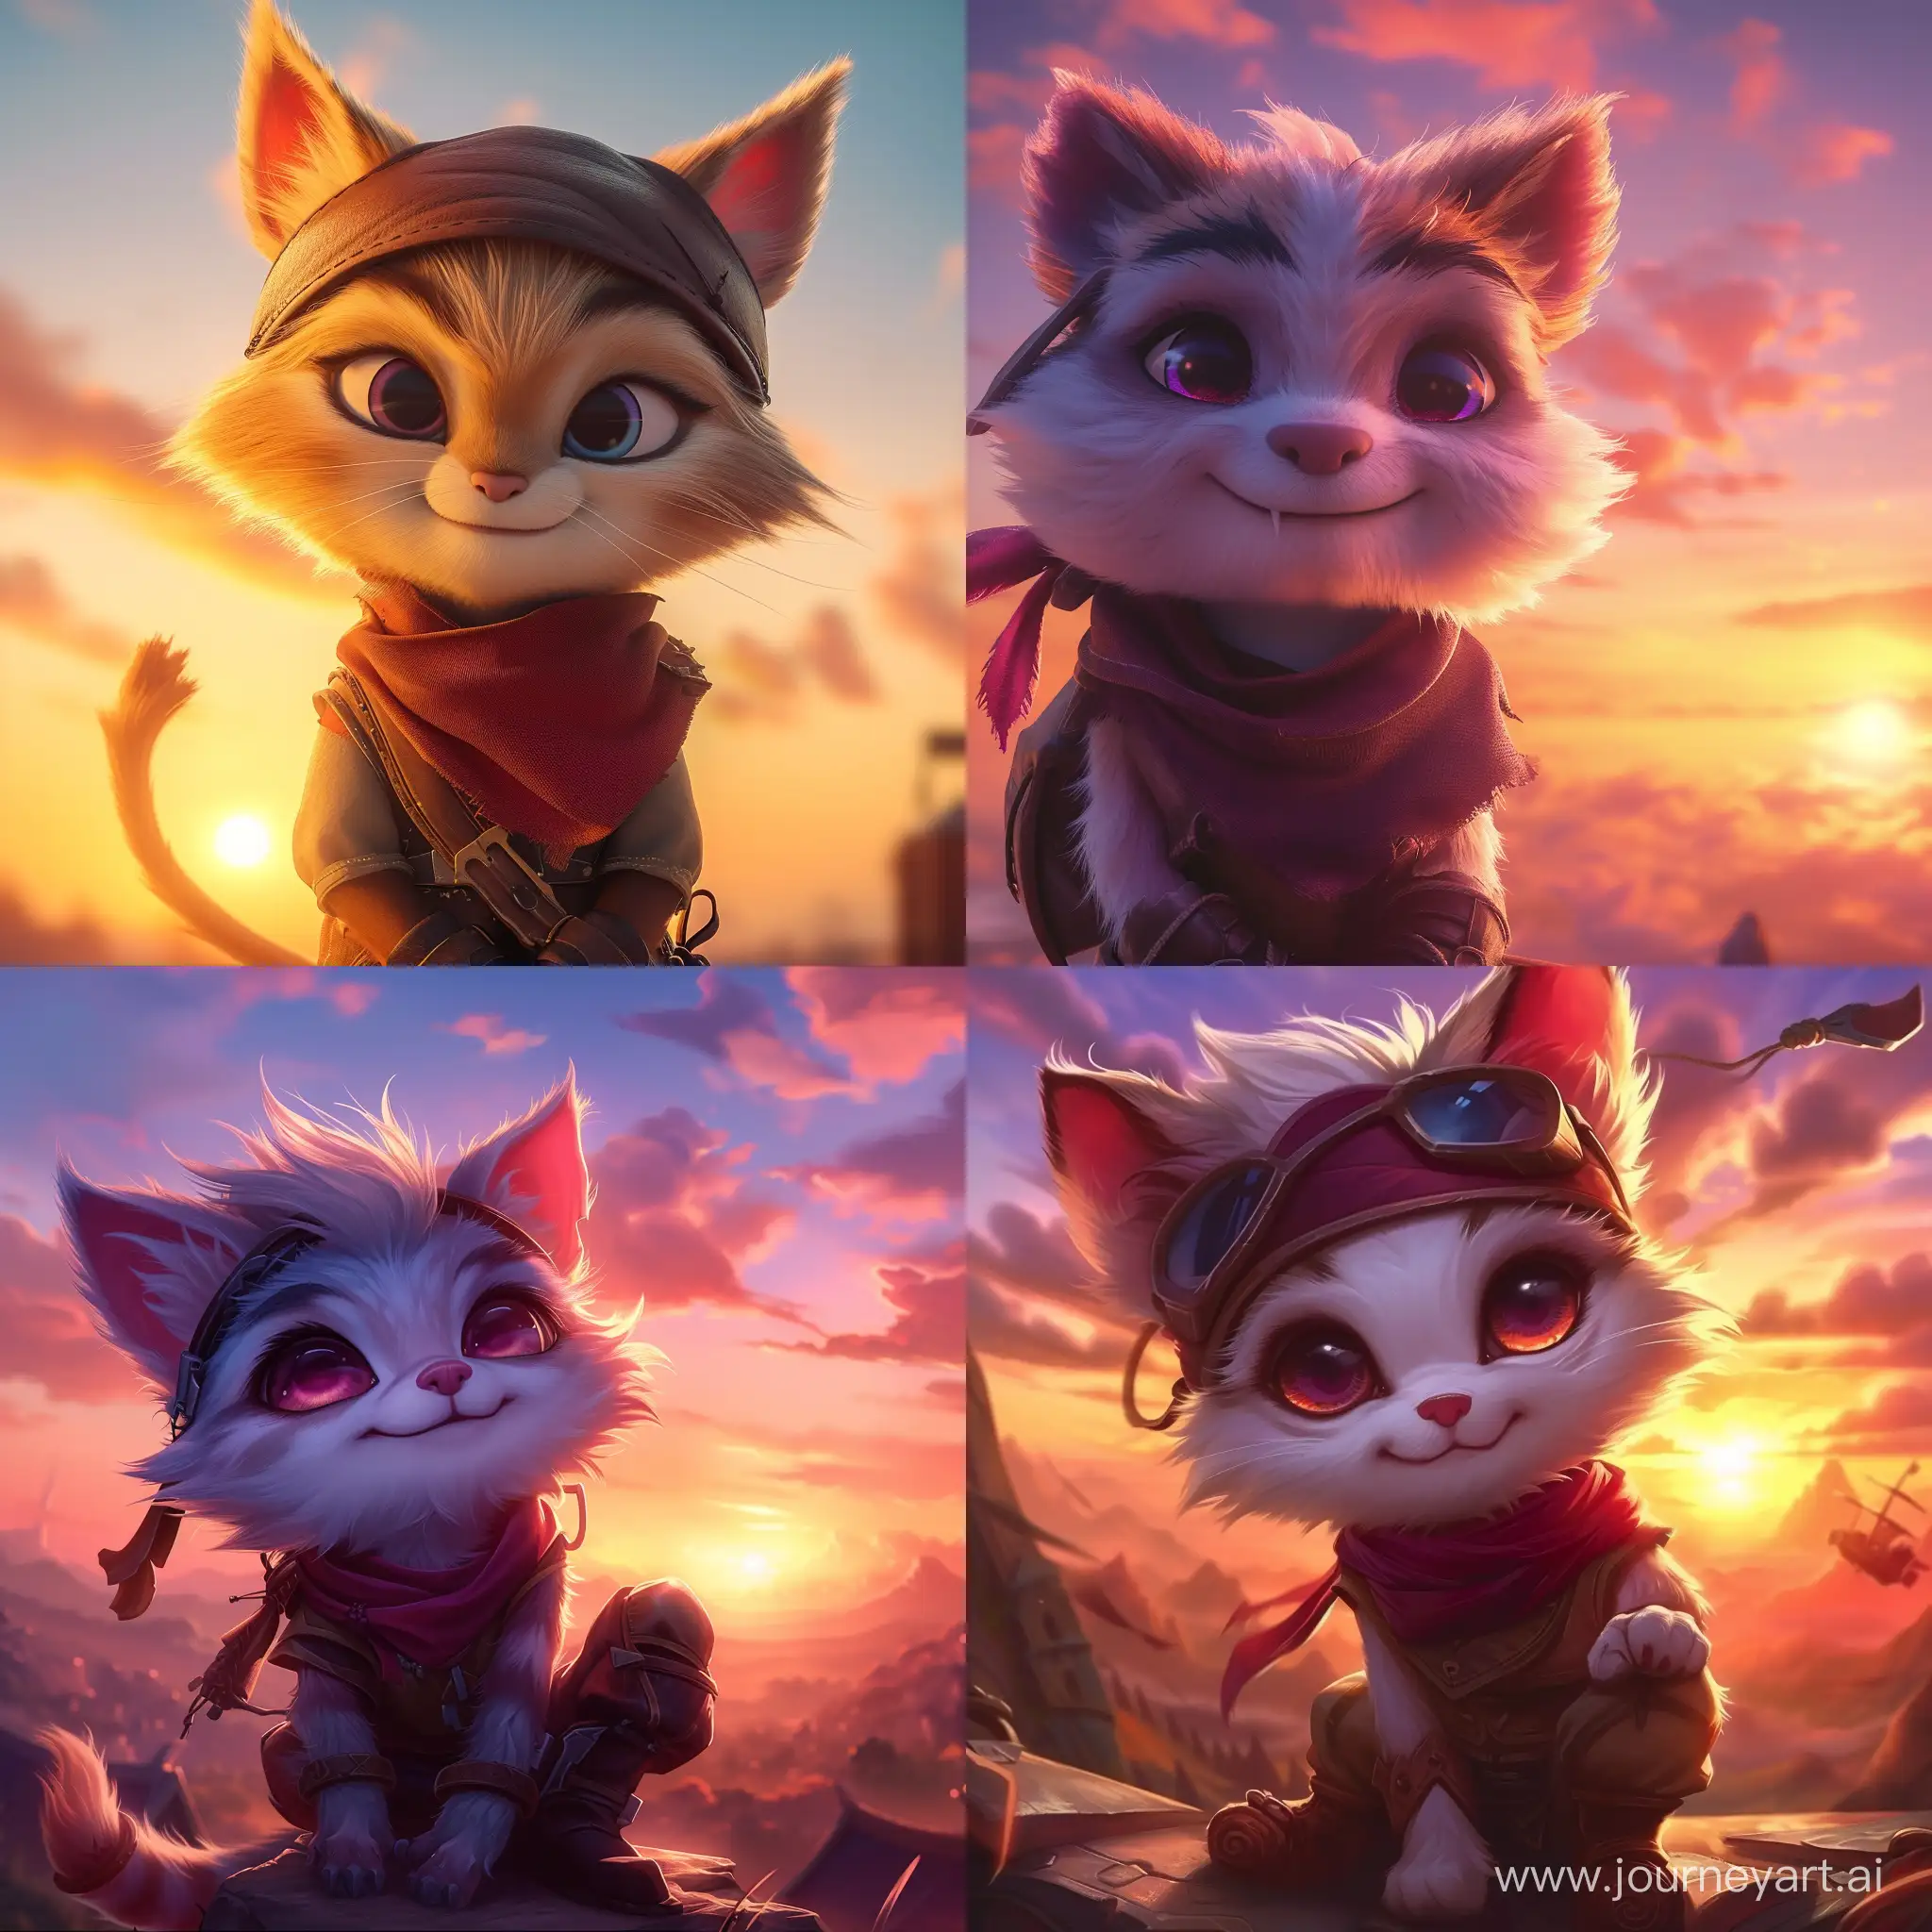 Teemo-with-Cute-Face-at-Sunset-Sweety-Scene-from-Puss-in-Boots-Movie-in-League-of-Legends